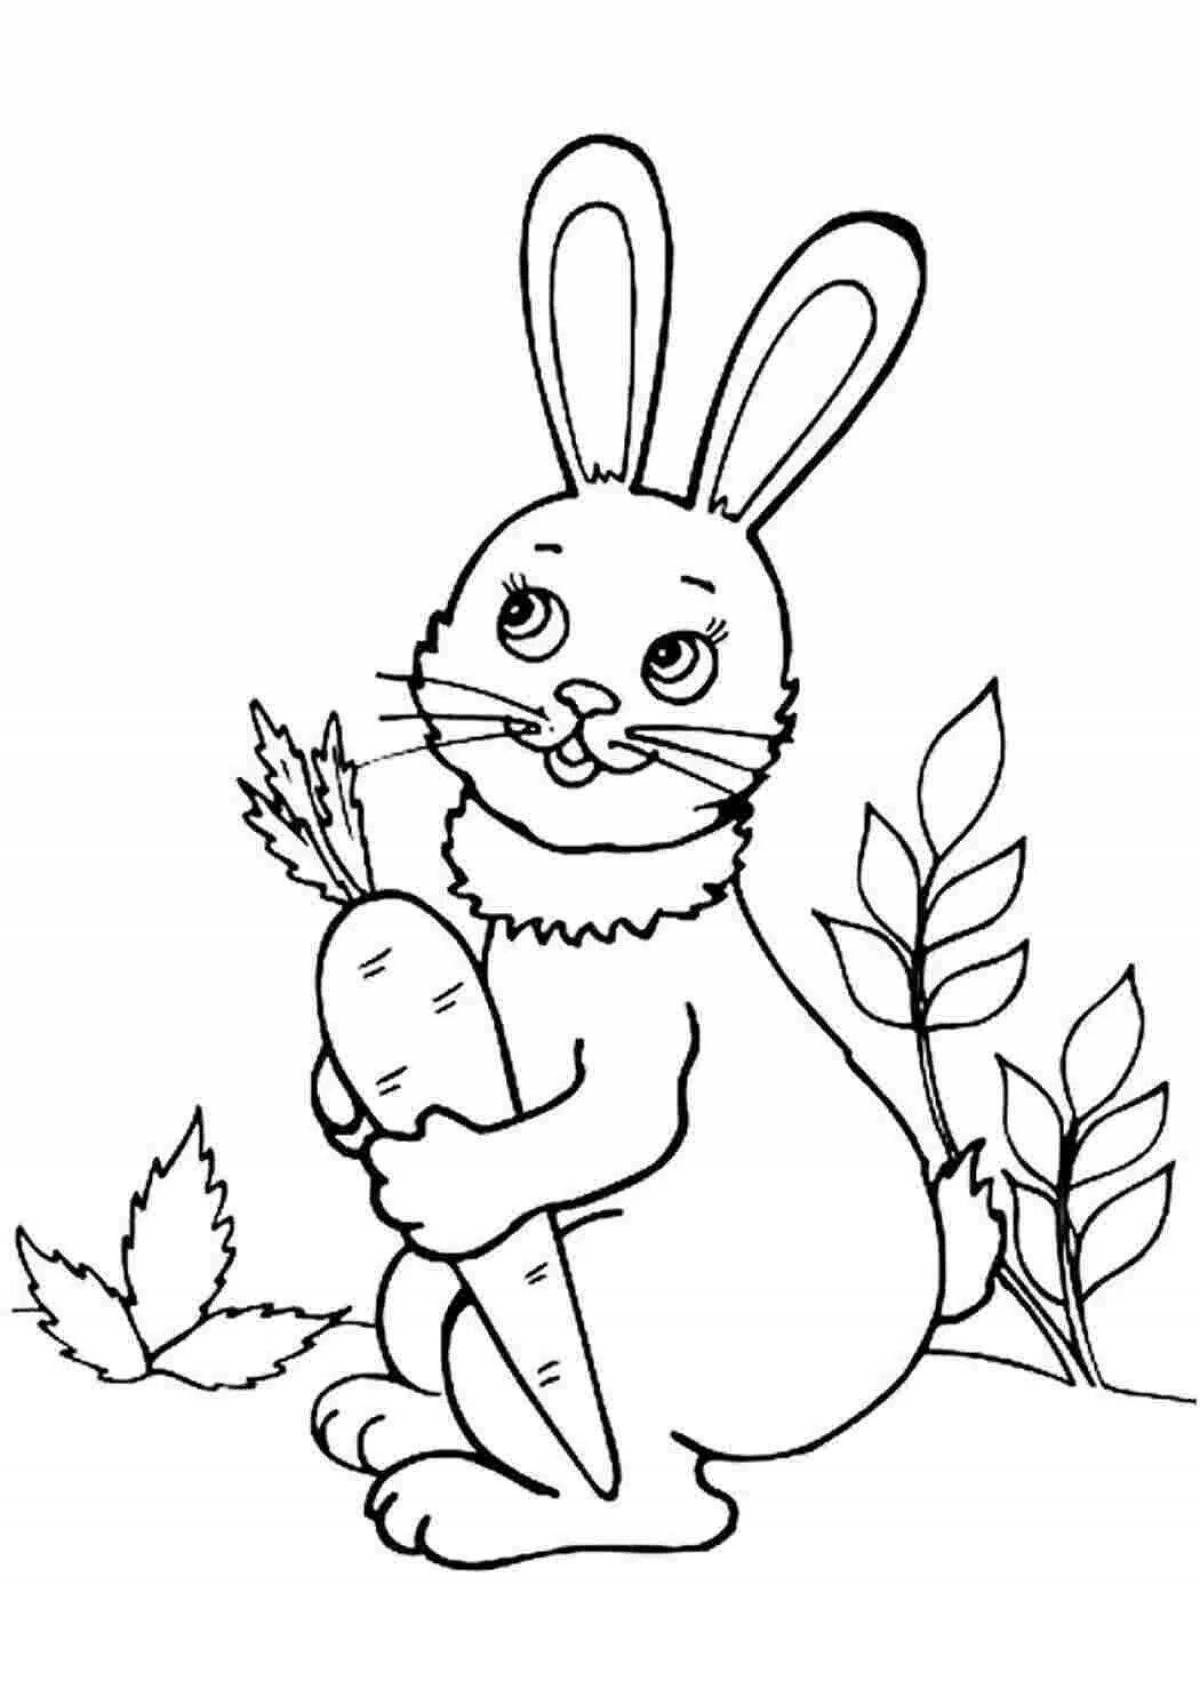 Creative bunny drawing for kids